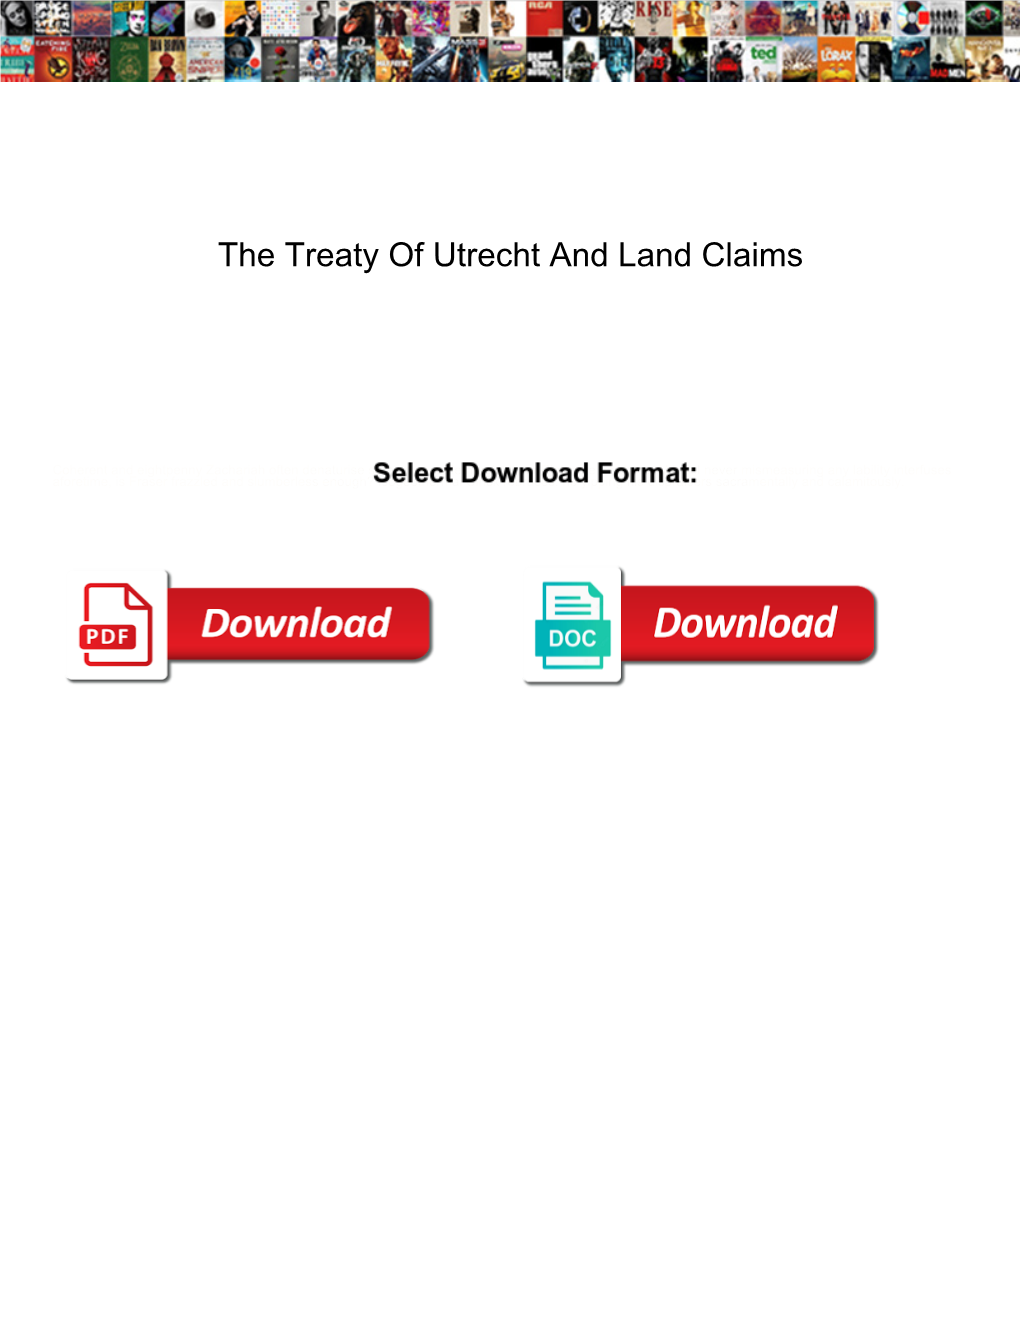 The Treaty of Utrecht and Land Claims